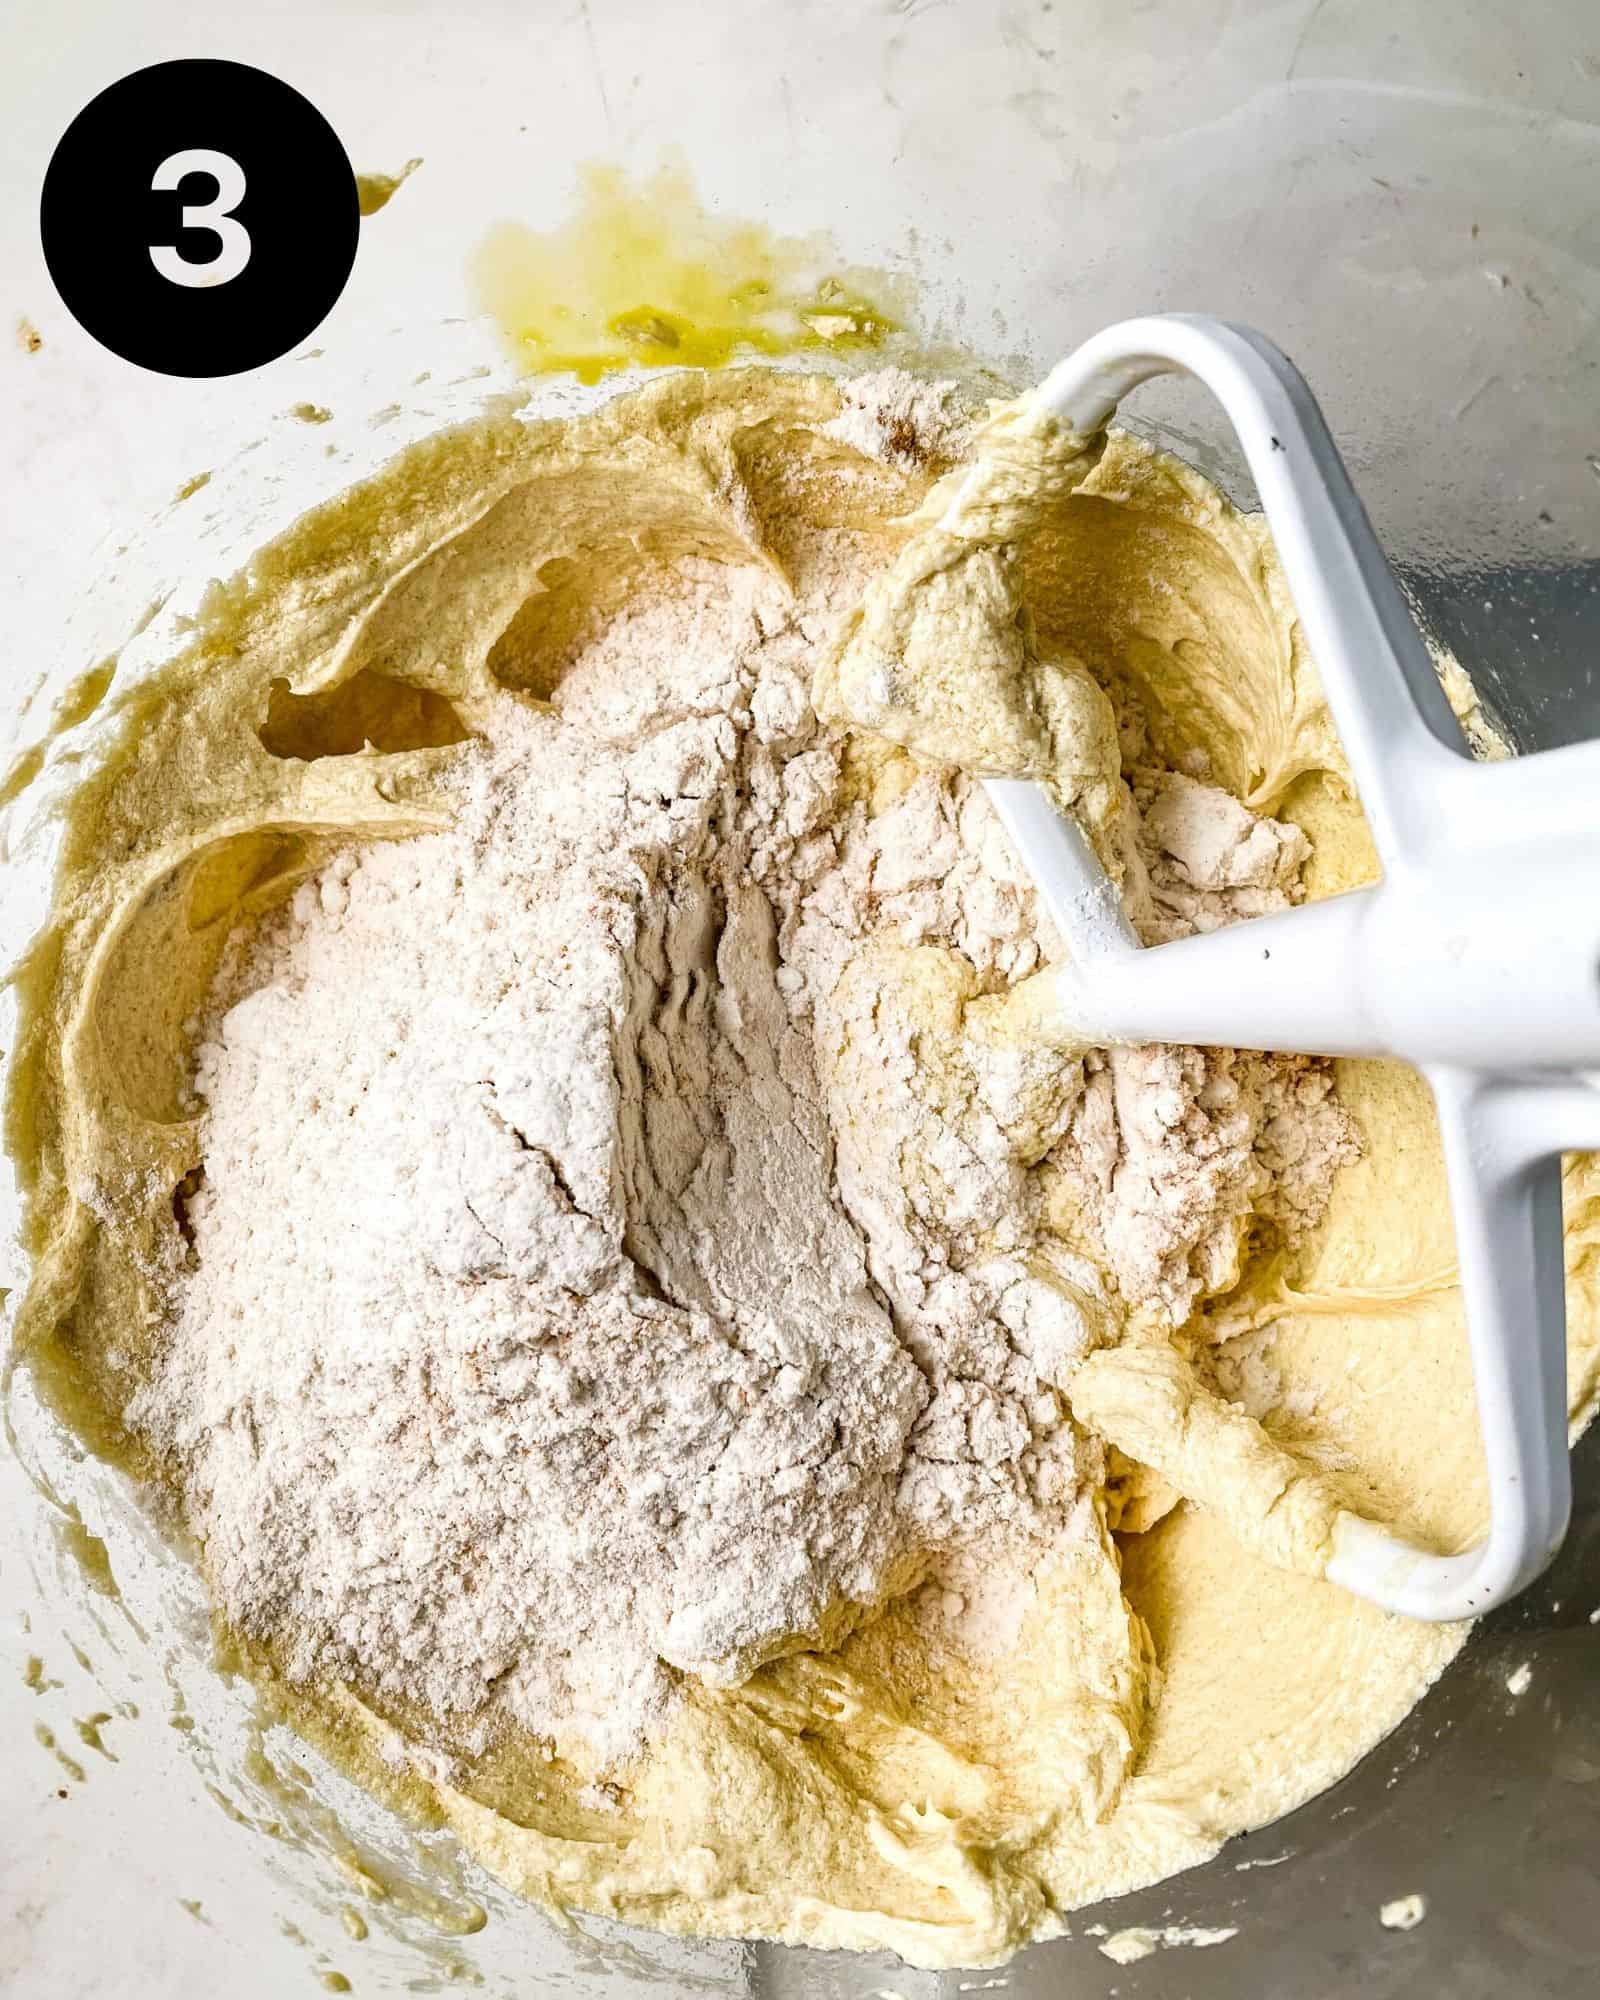 dry ingredients and wet ingredients combined in a mixing bowl.